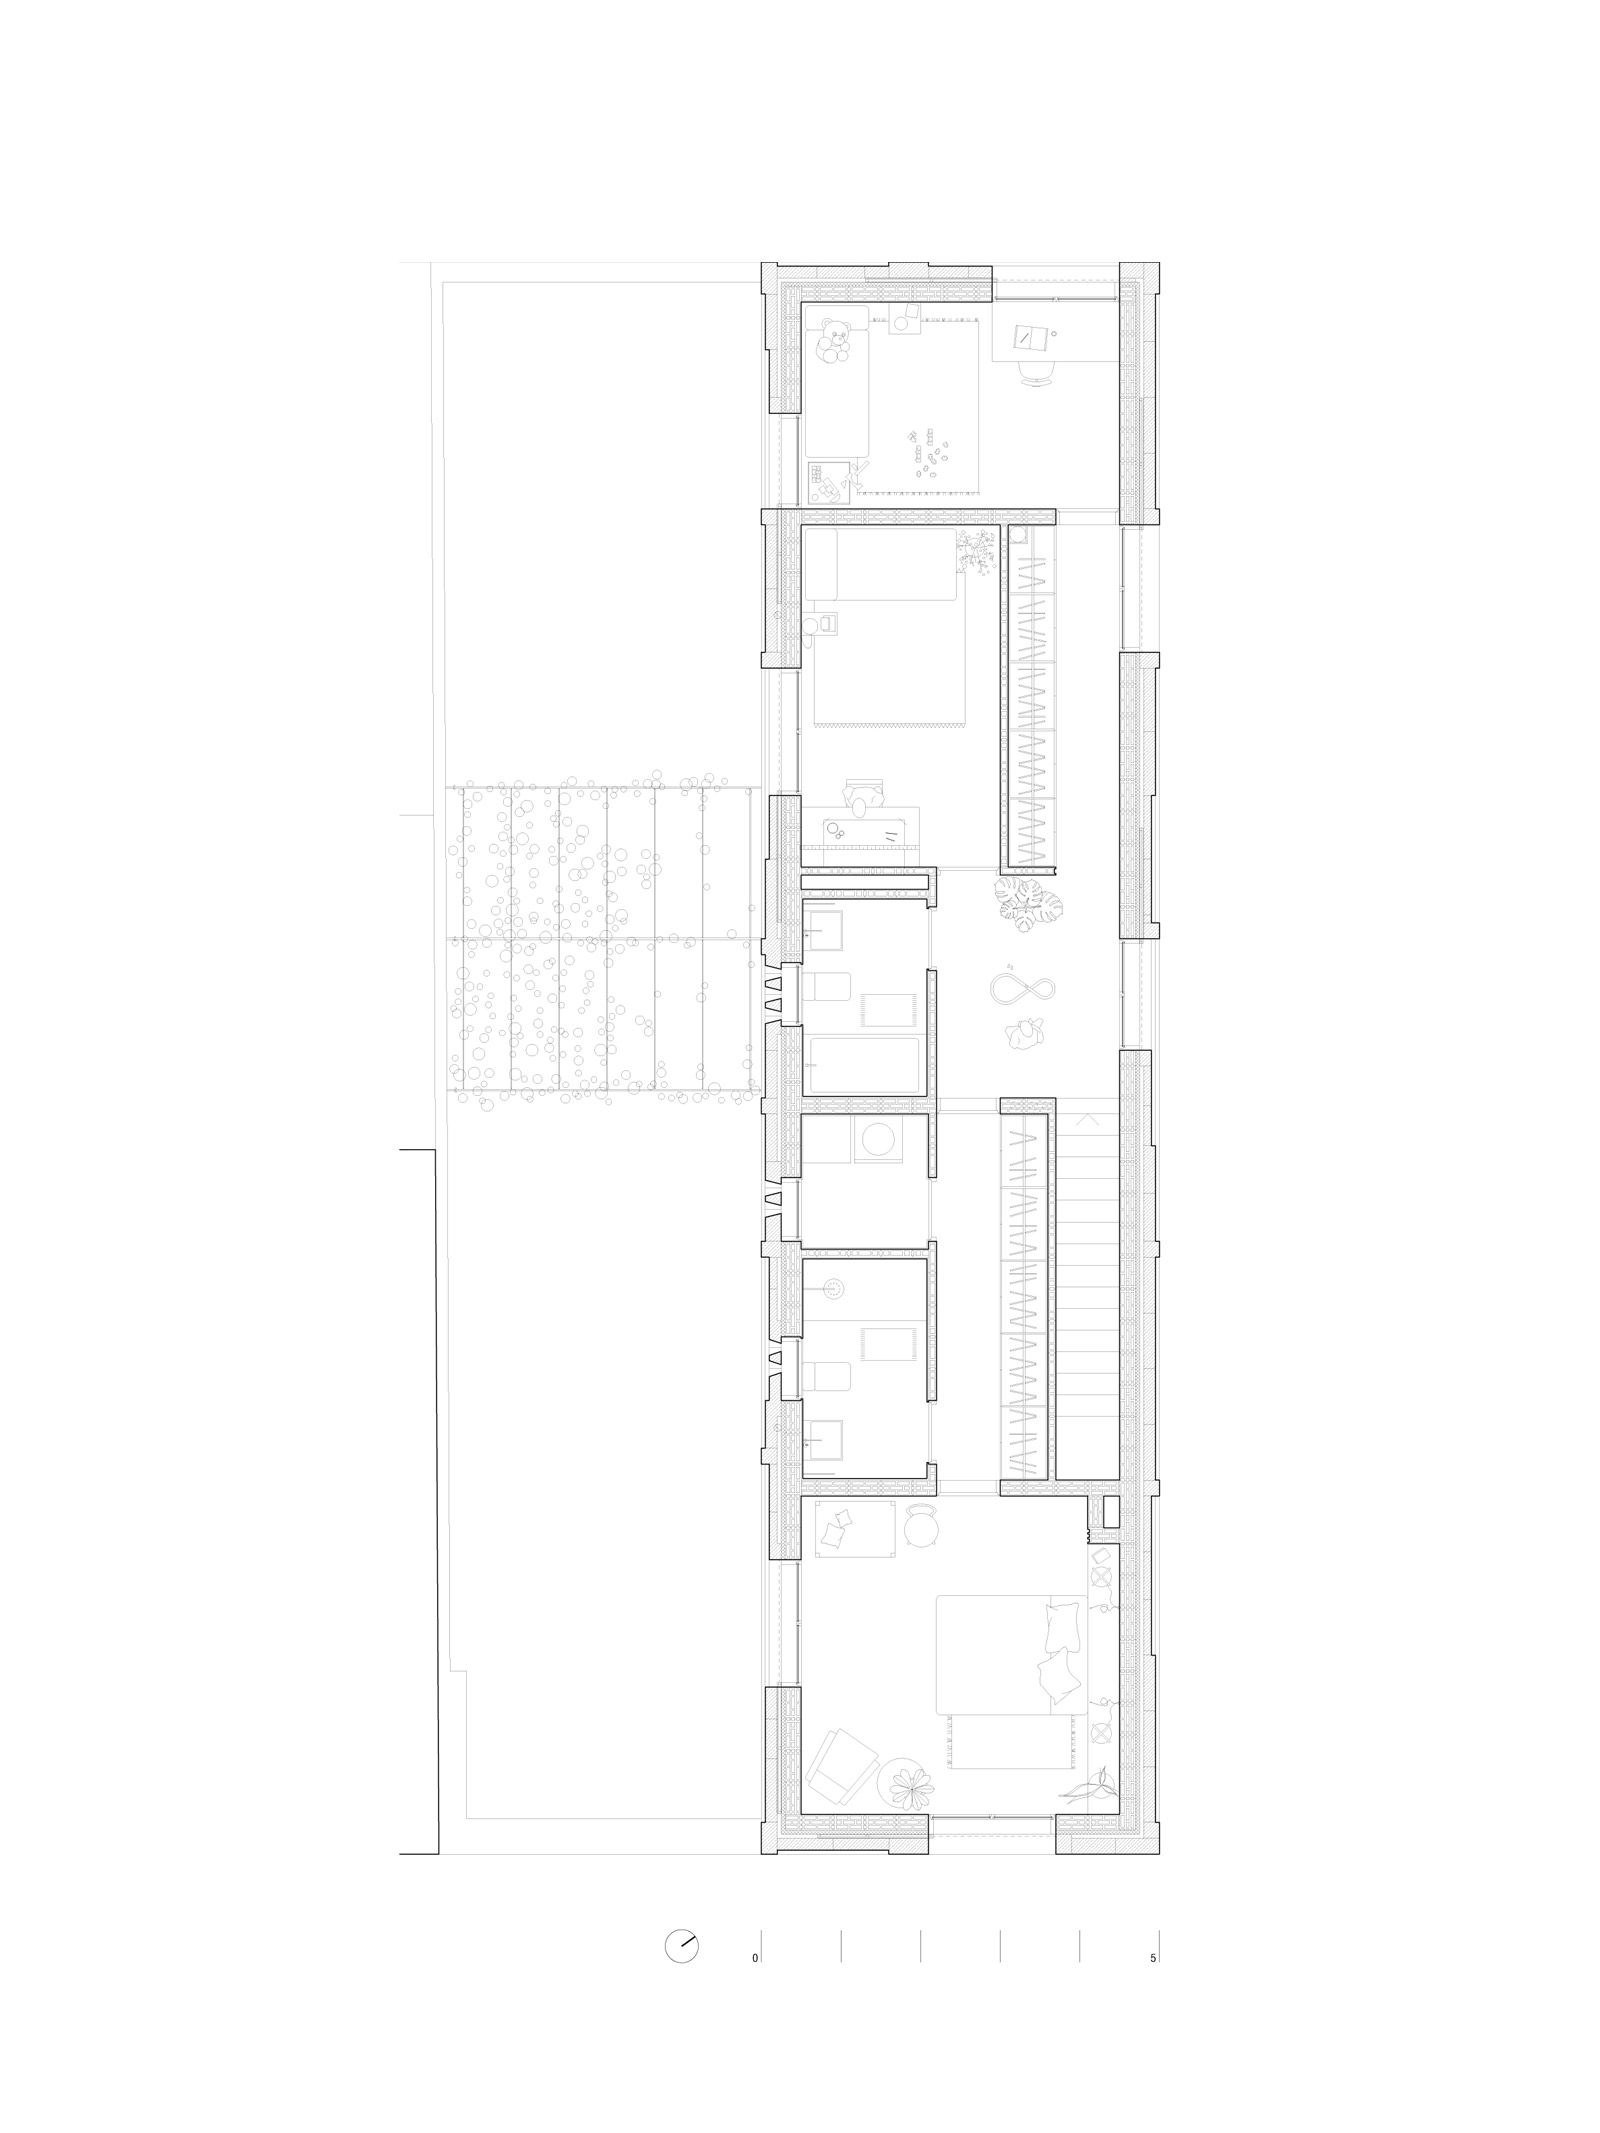 Image of 20230228 TEdA Guillem Plans 2 in Guillem and Cati's home - Cosentino